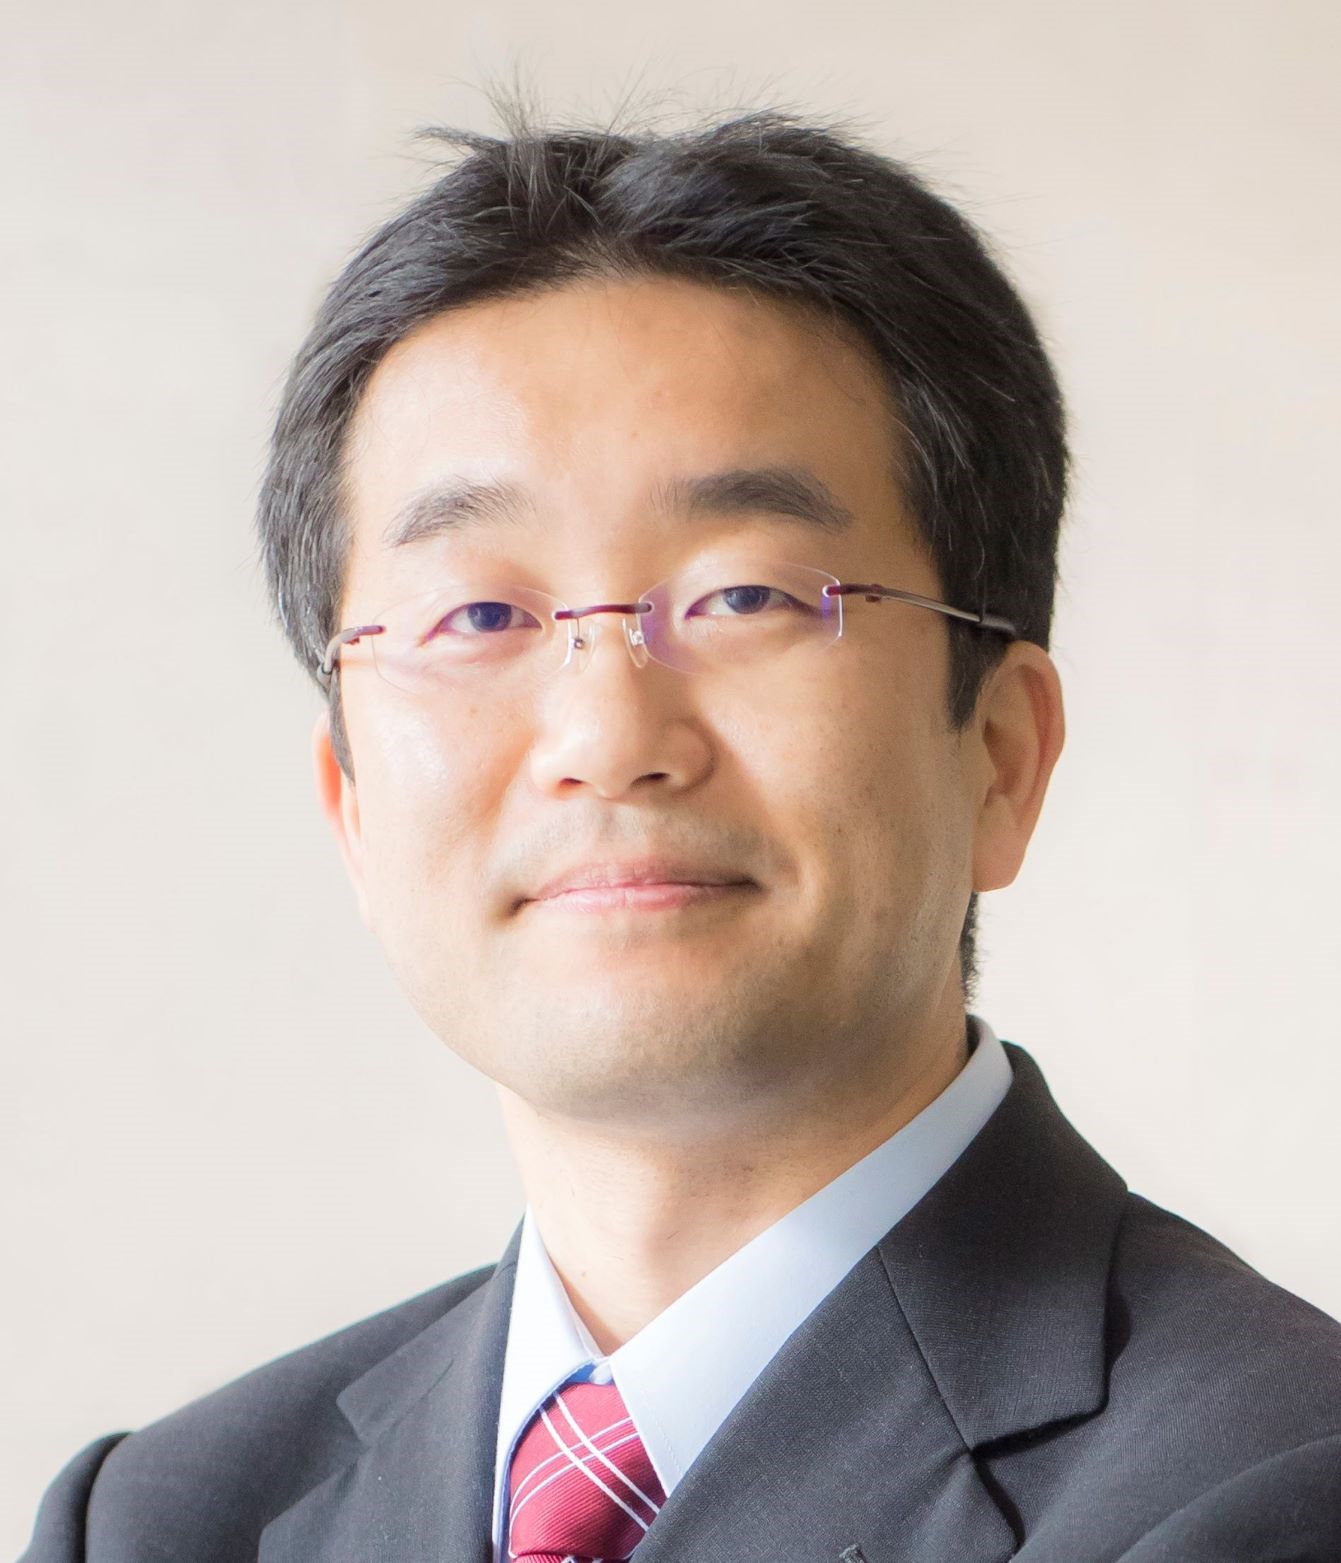 Professor Masashi Sugiyama of Graduate School of Frontier Sciences (concurrently in charge of Department of Information Science) received the Commendation for Science and Technology from the Minister of Education, Culture, Sports, Science and Technology